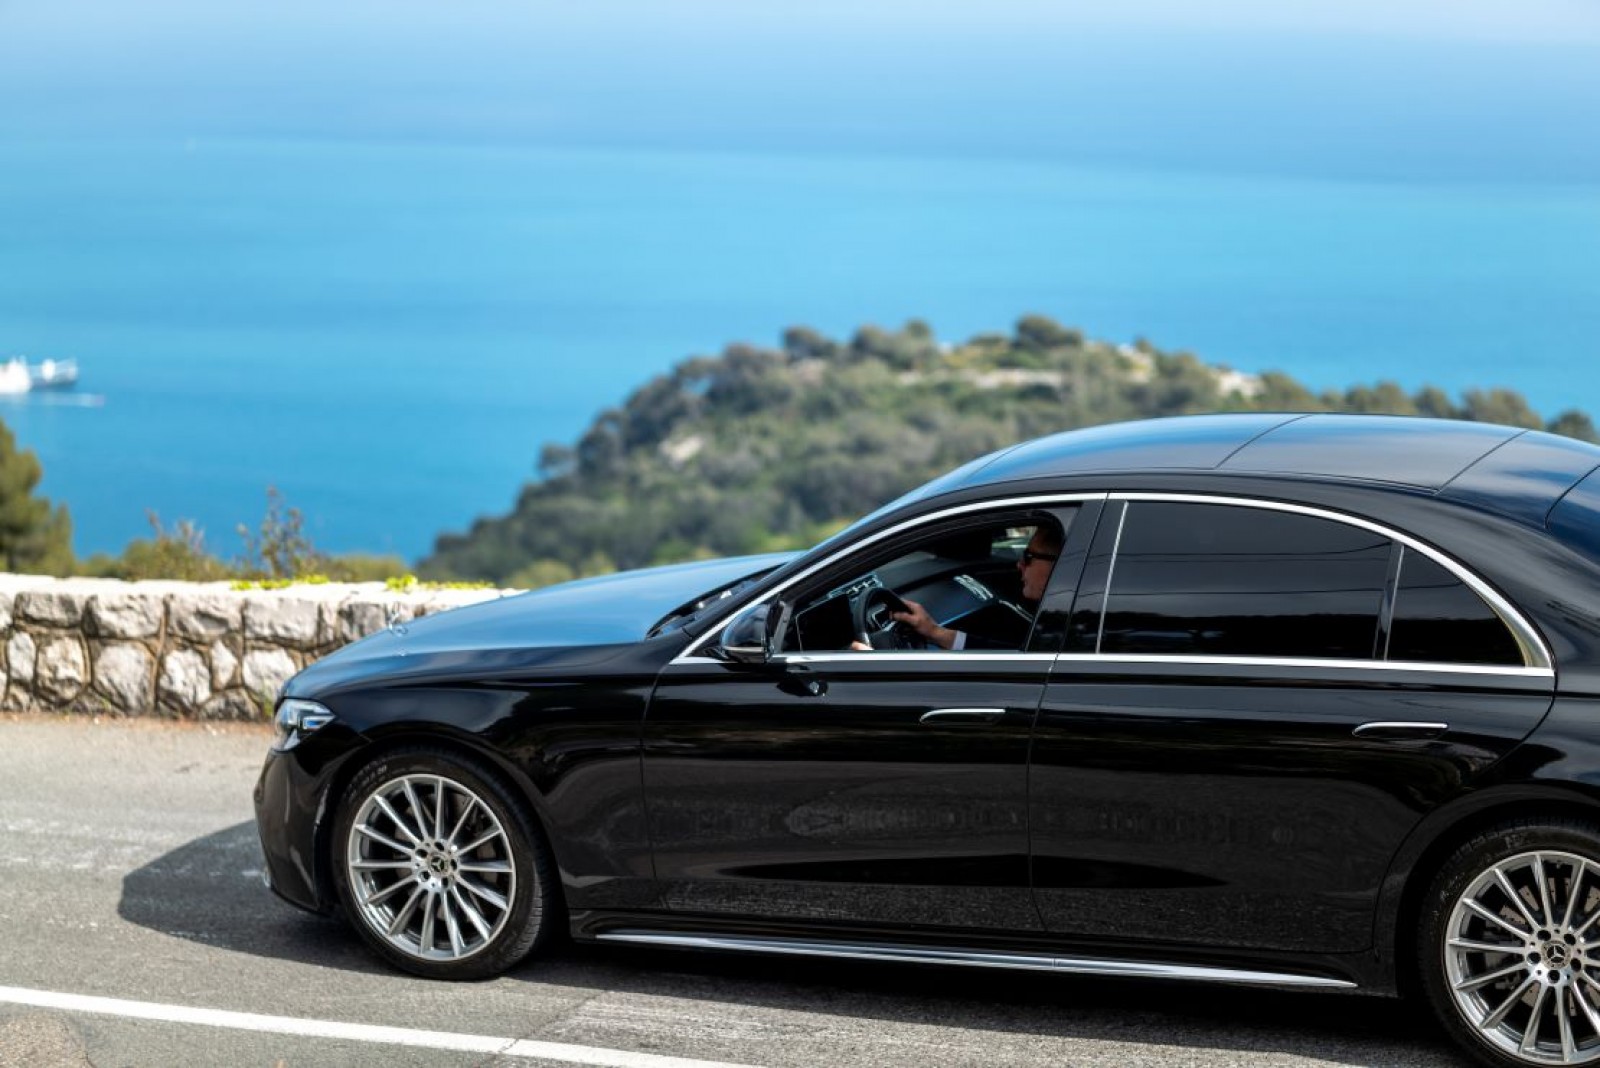 Chauffeur Service in Cannes | Nice | St Tropez – 24/7 – Private Driver – Ruby Services